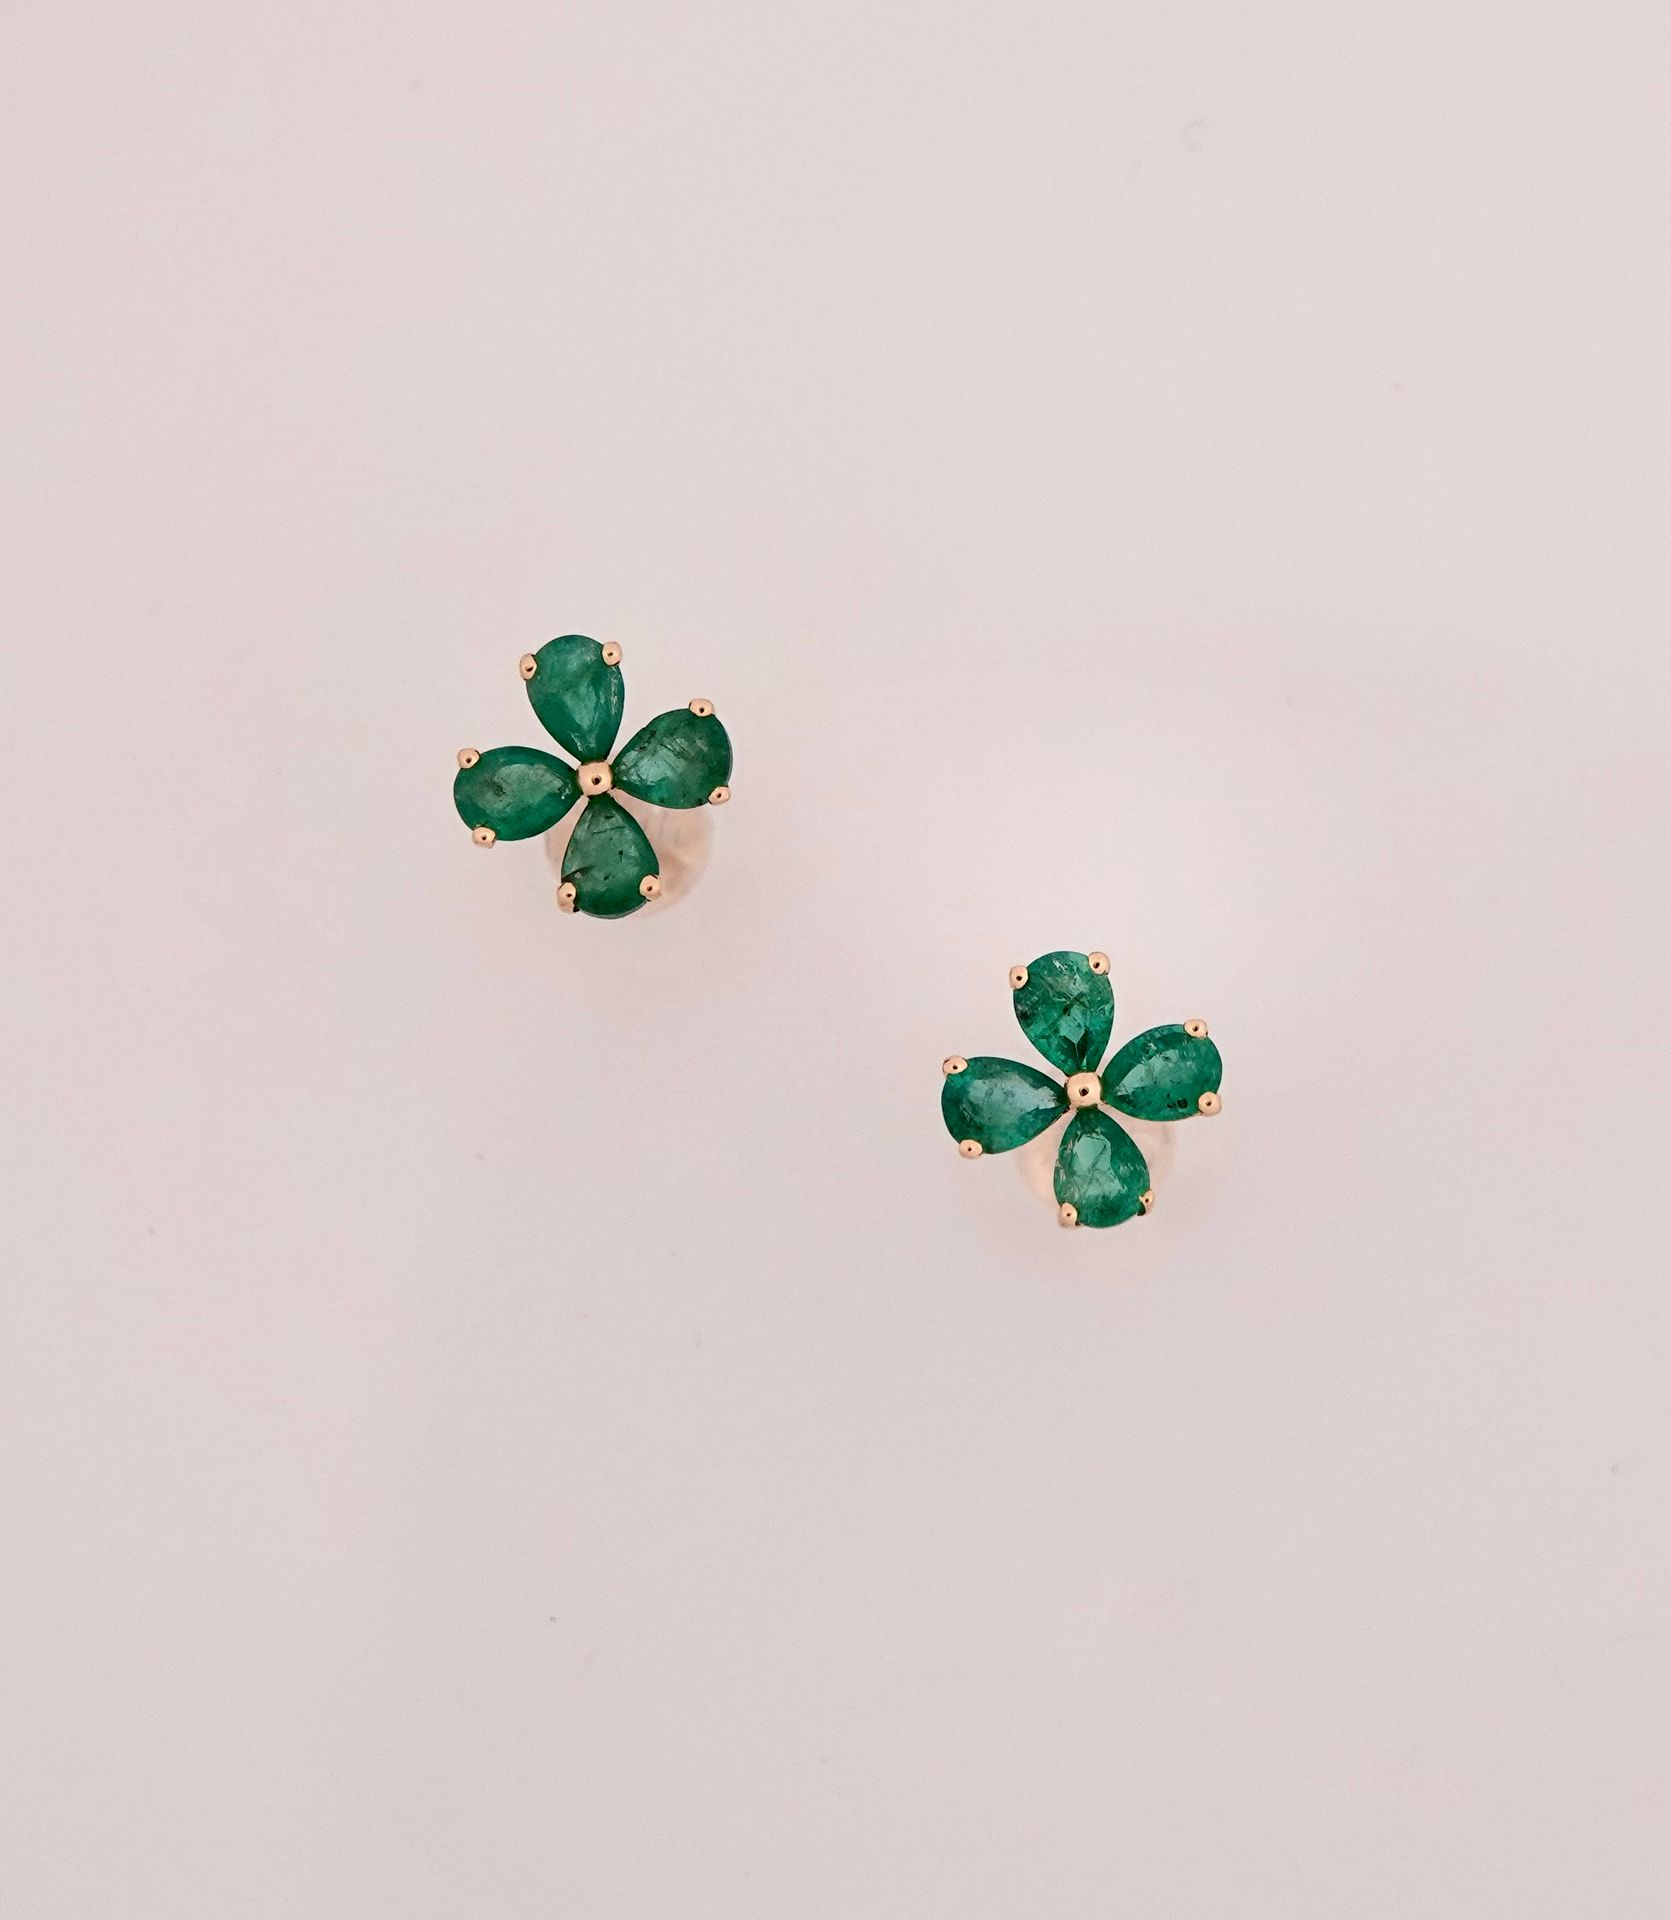 Null Flower earrings in white gold, 750 MM, set with pear-cut emeralds totaling &hellip;